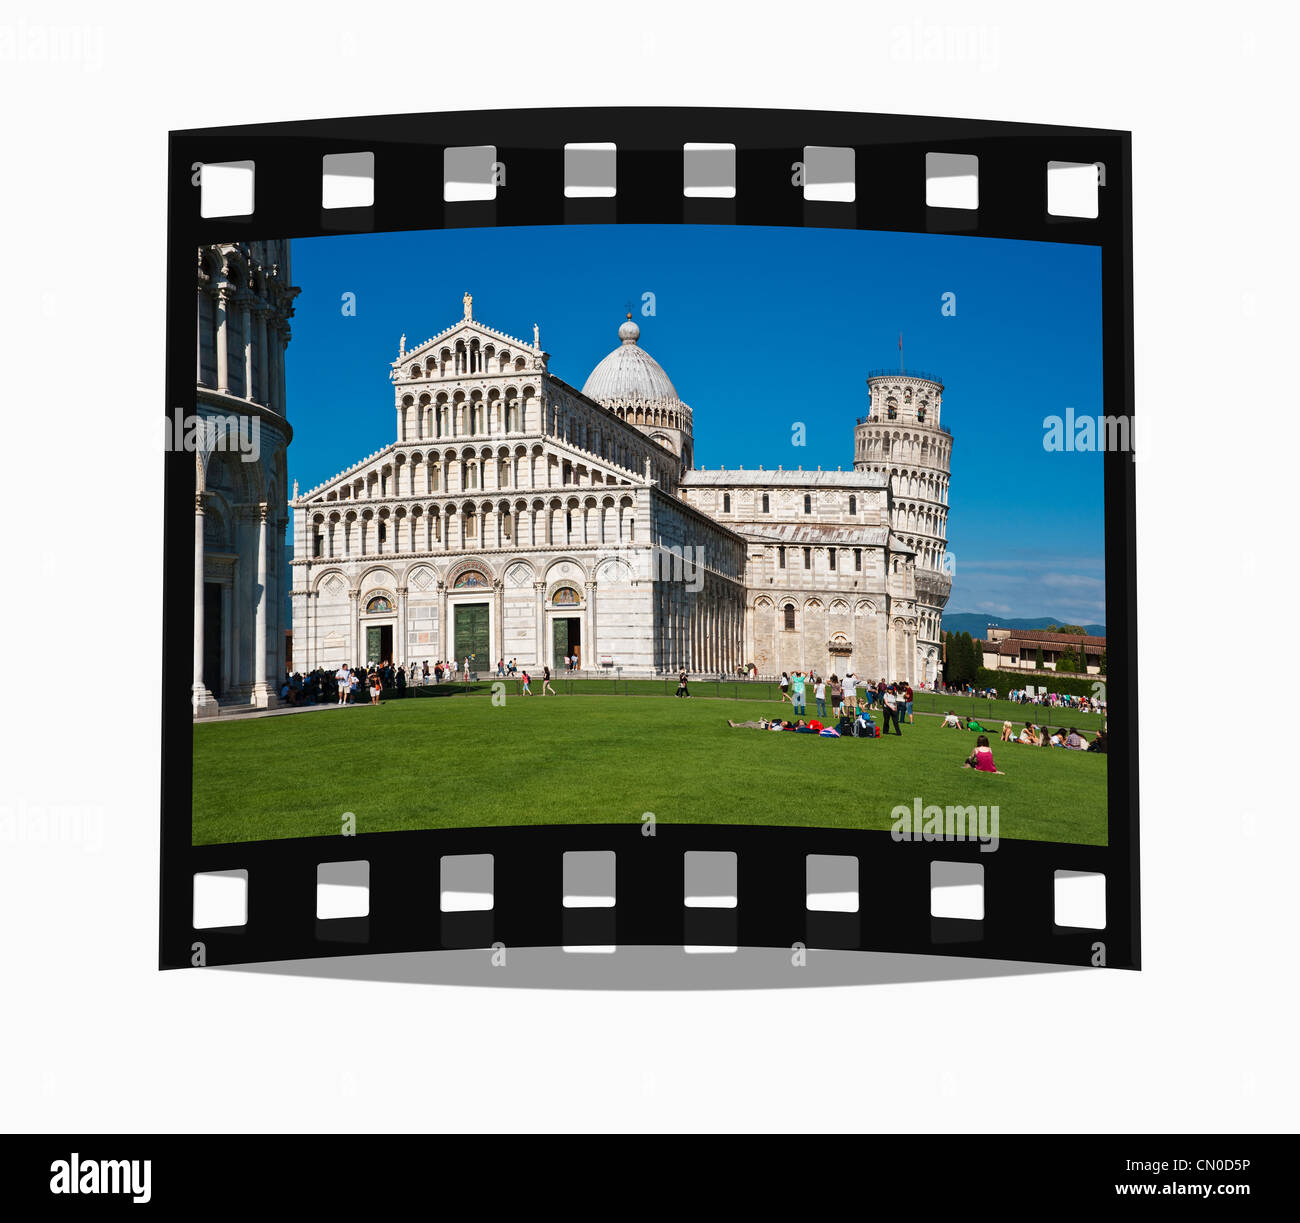 Filmstrip: Cathedral Square, Duomo St. Mary of the Assumption and the Leaning Tower of Pisa, 57 meters high, Pisa, Italy Stock Photo